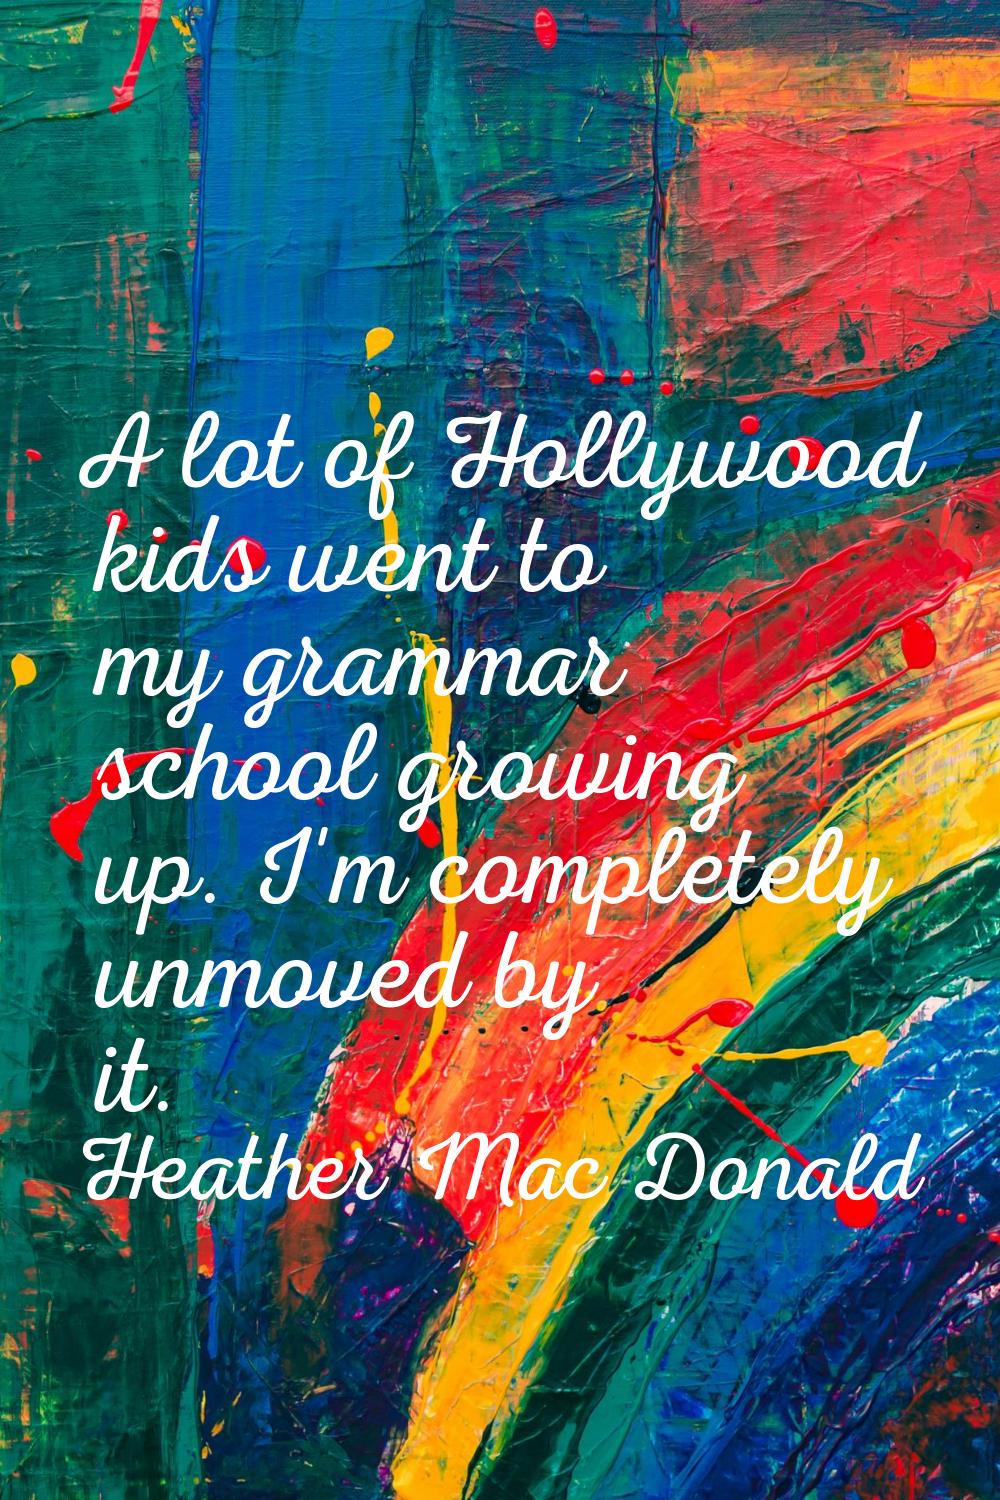 A lot of Hollywood kids went to my grammar school growing up. I'm completely unmoved by it.